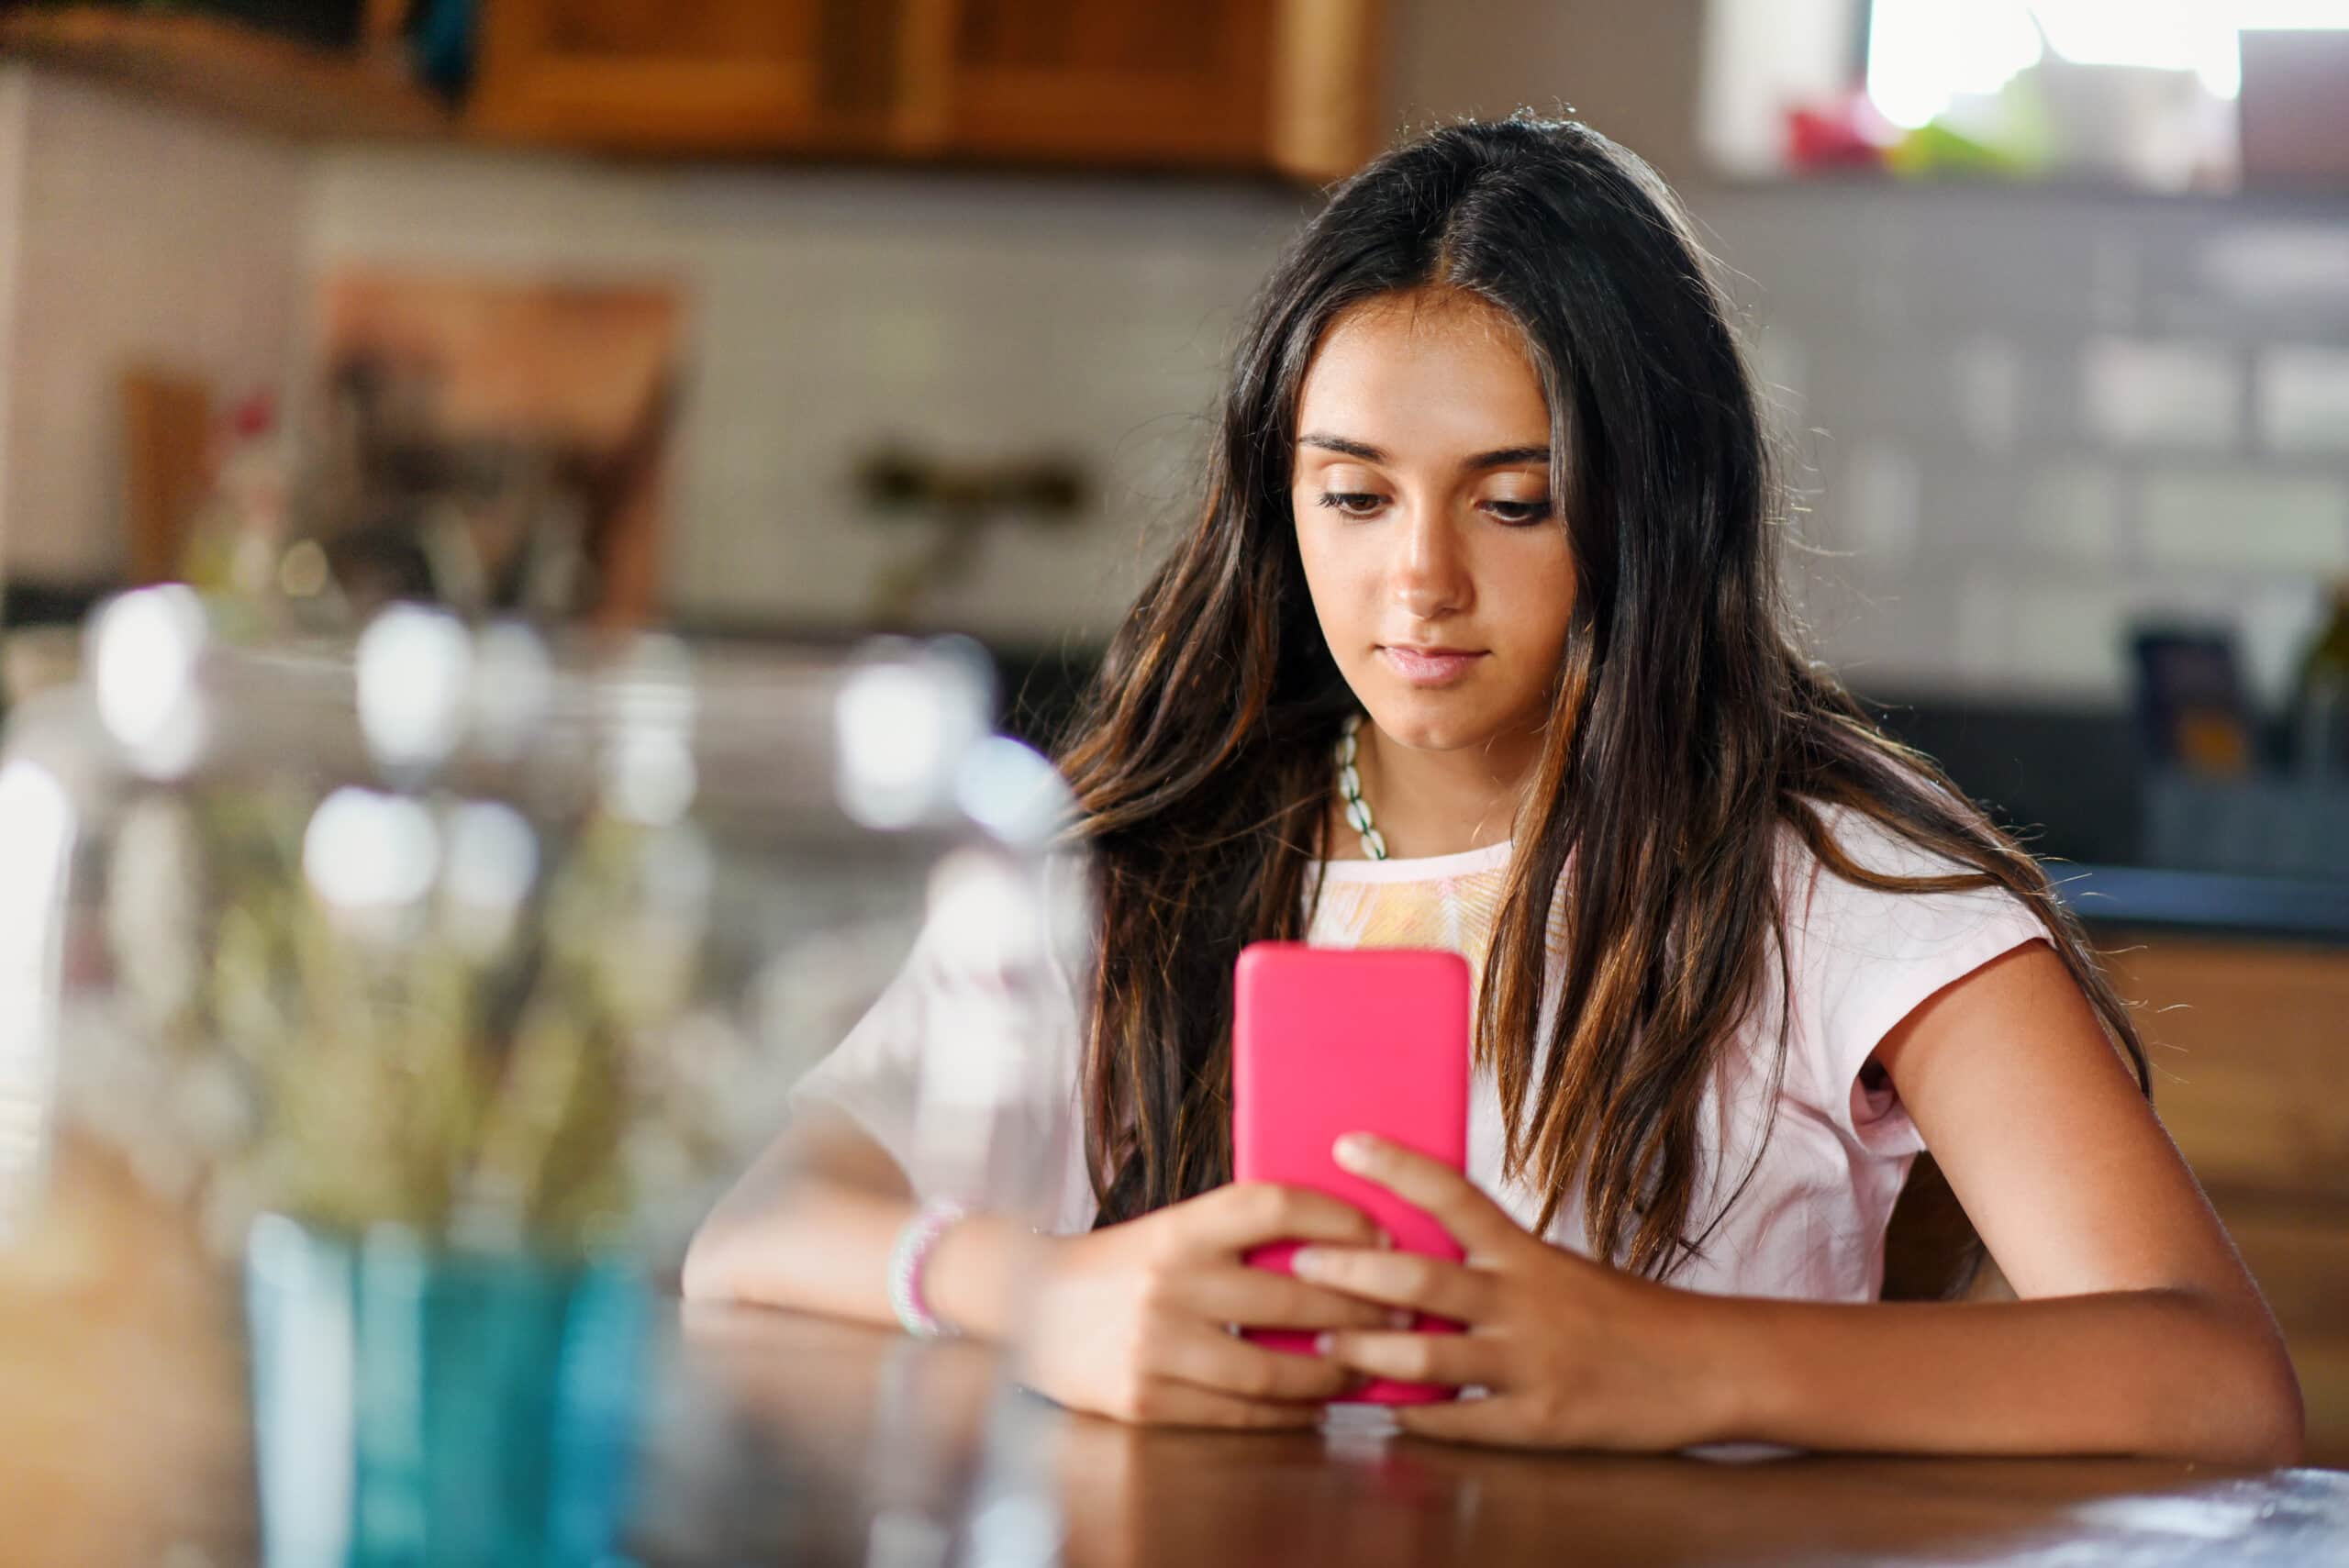 A teenage girl sits at the dining table reading messages or browsing the internet on her phone.